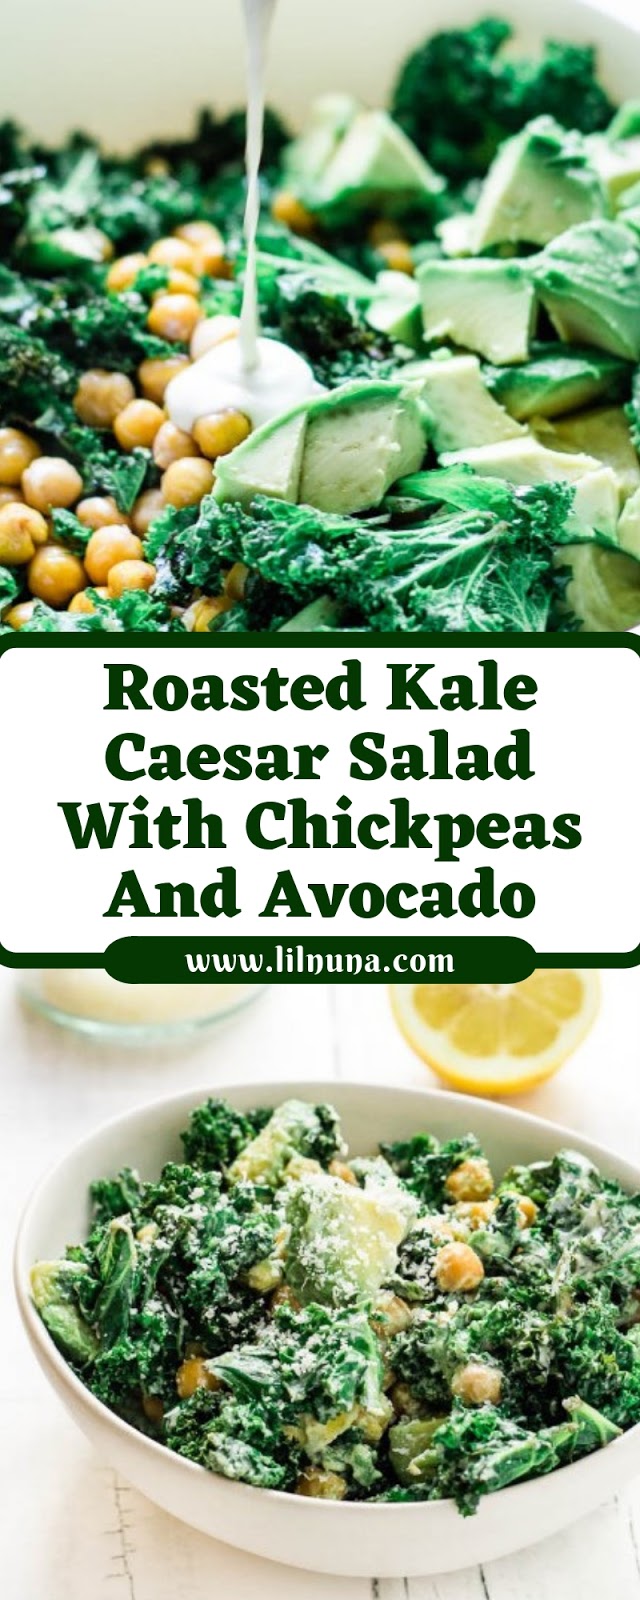 Roasted Kale Caesar Salad With Chickpeas And Avocado